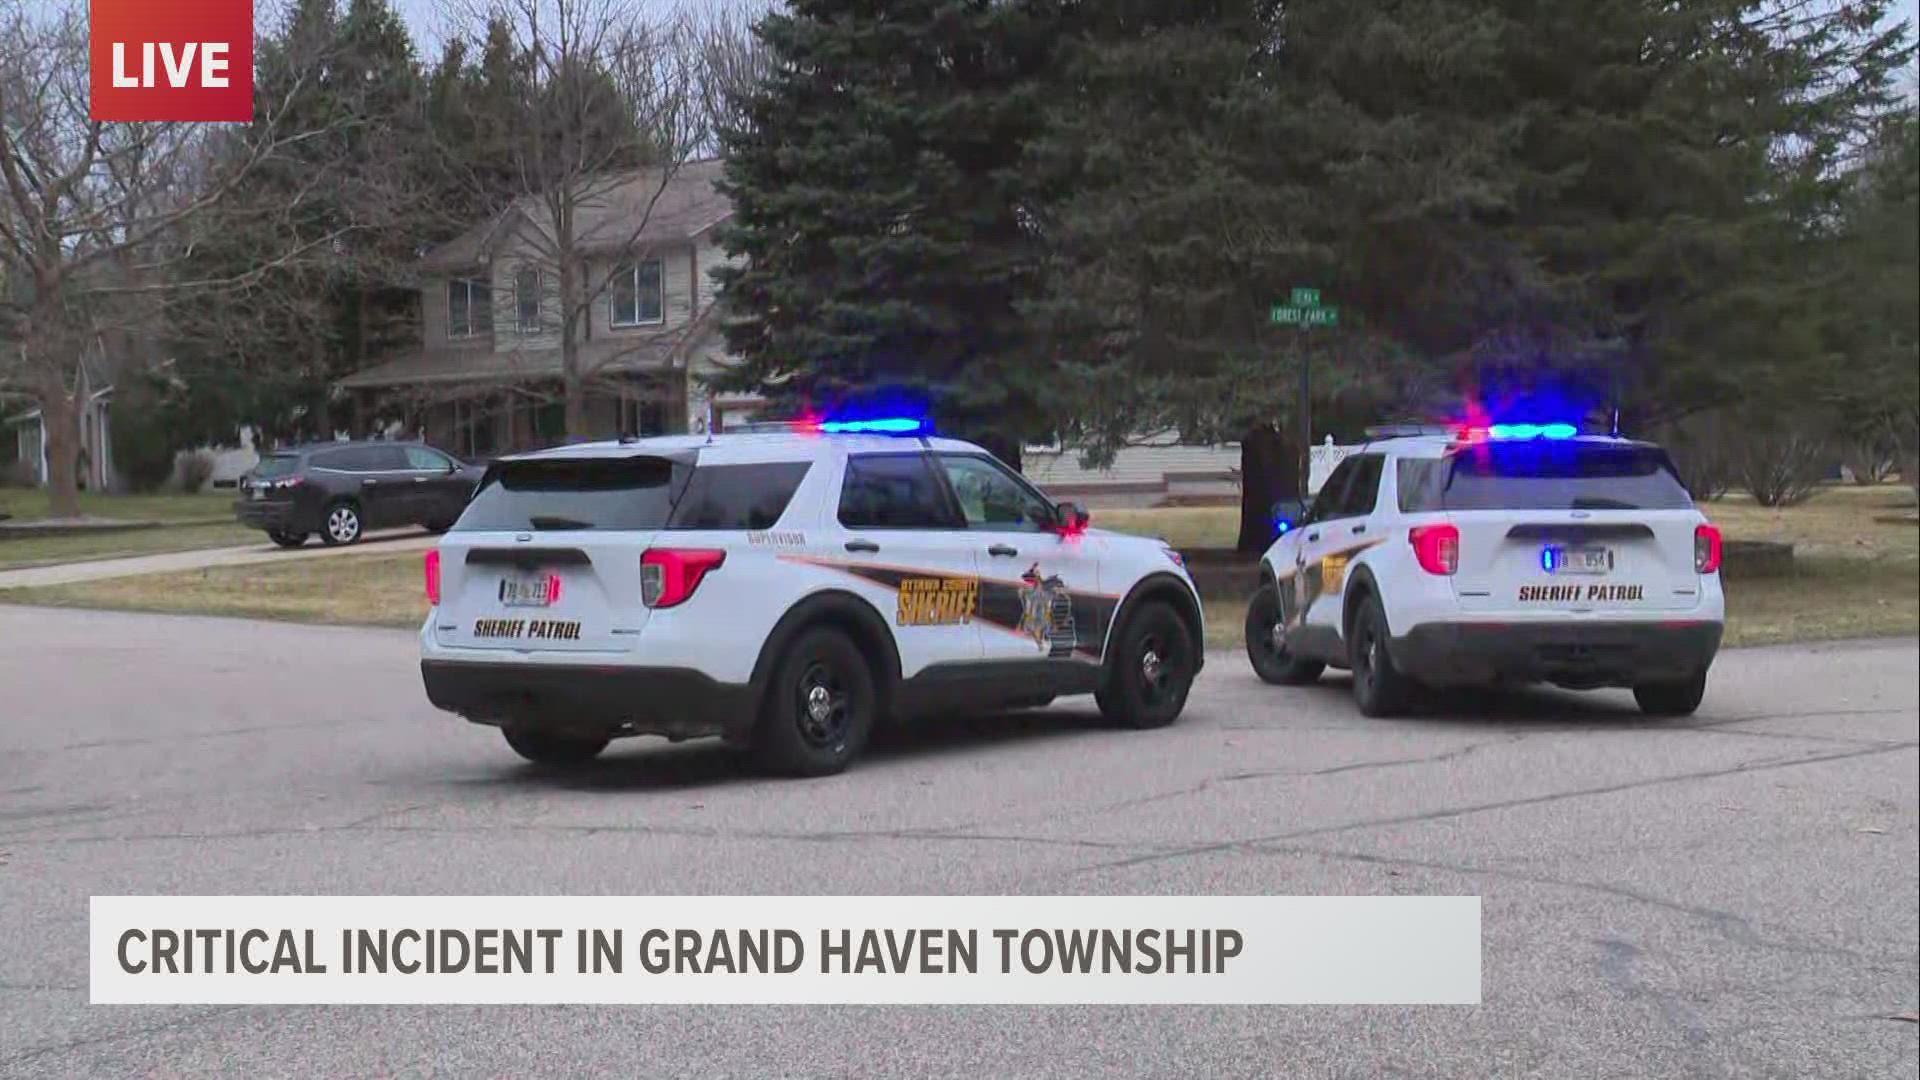 The Ottawa County Sheriff's Office is responding to what they describe as a "critical incident" in Grand Haven Township Tuesday afternoon.